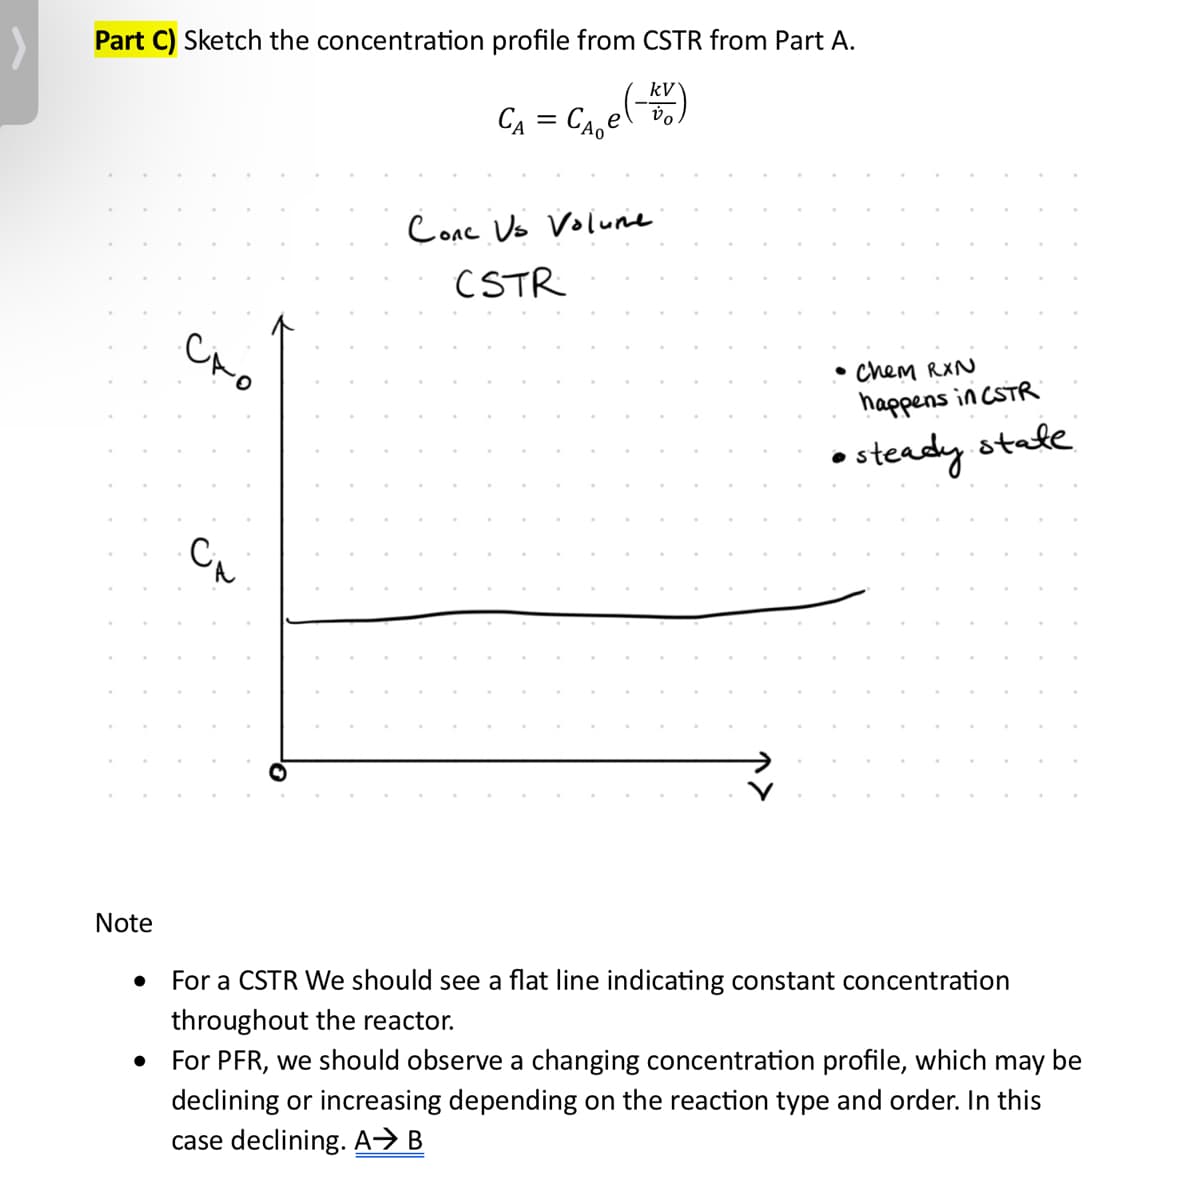 Part C) Sketch the concentration profile from CSTR from Part A.
‚e (BD)
Note
CA
CA = CAe
Cone Us Volure.
CSTR
• Chem RXN
happens in CSTR
• steady state
For a CSTR We should see a flat line indicating constant concentration
throughout the reactor.
For PFR, we should observe a changing concentration profile, which may be
declining or increasing depending on the reaction type and order. In this
case declining. A⇒ B